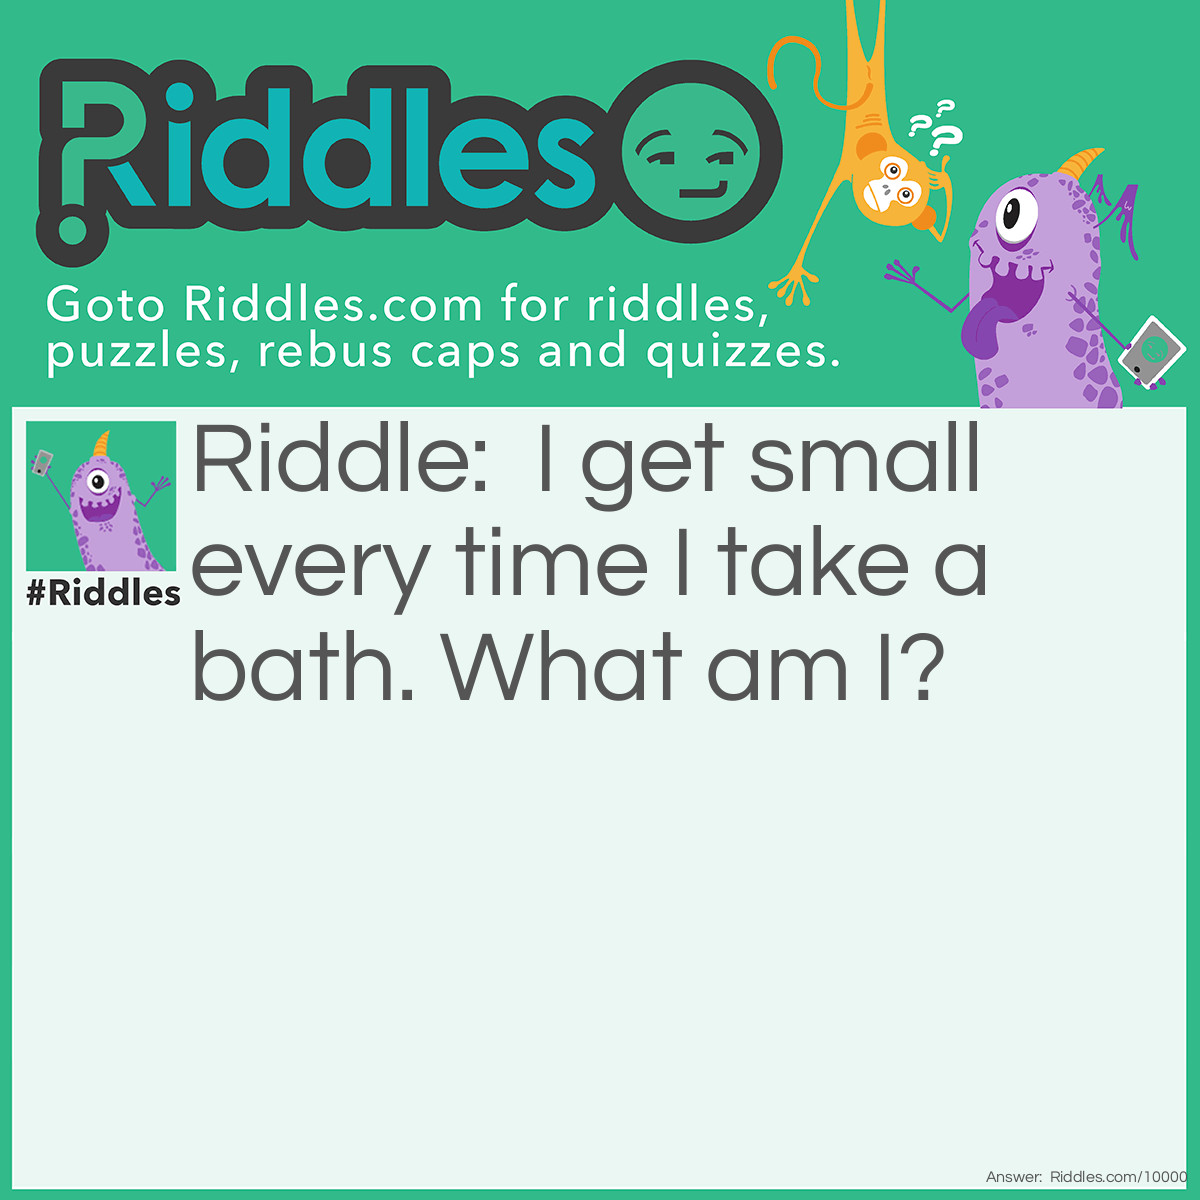 Riddle: I get small every time I take a bath. What am I? Answer: A bar of soap.